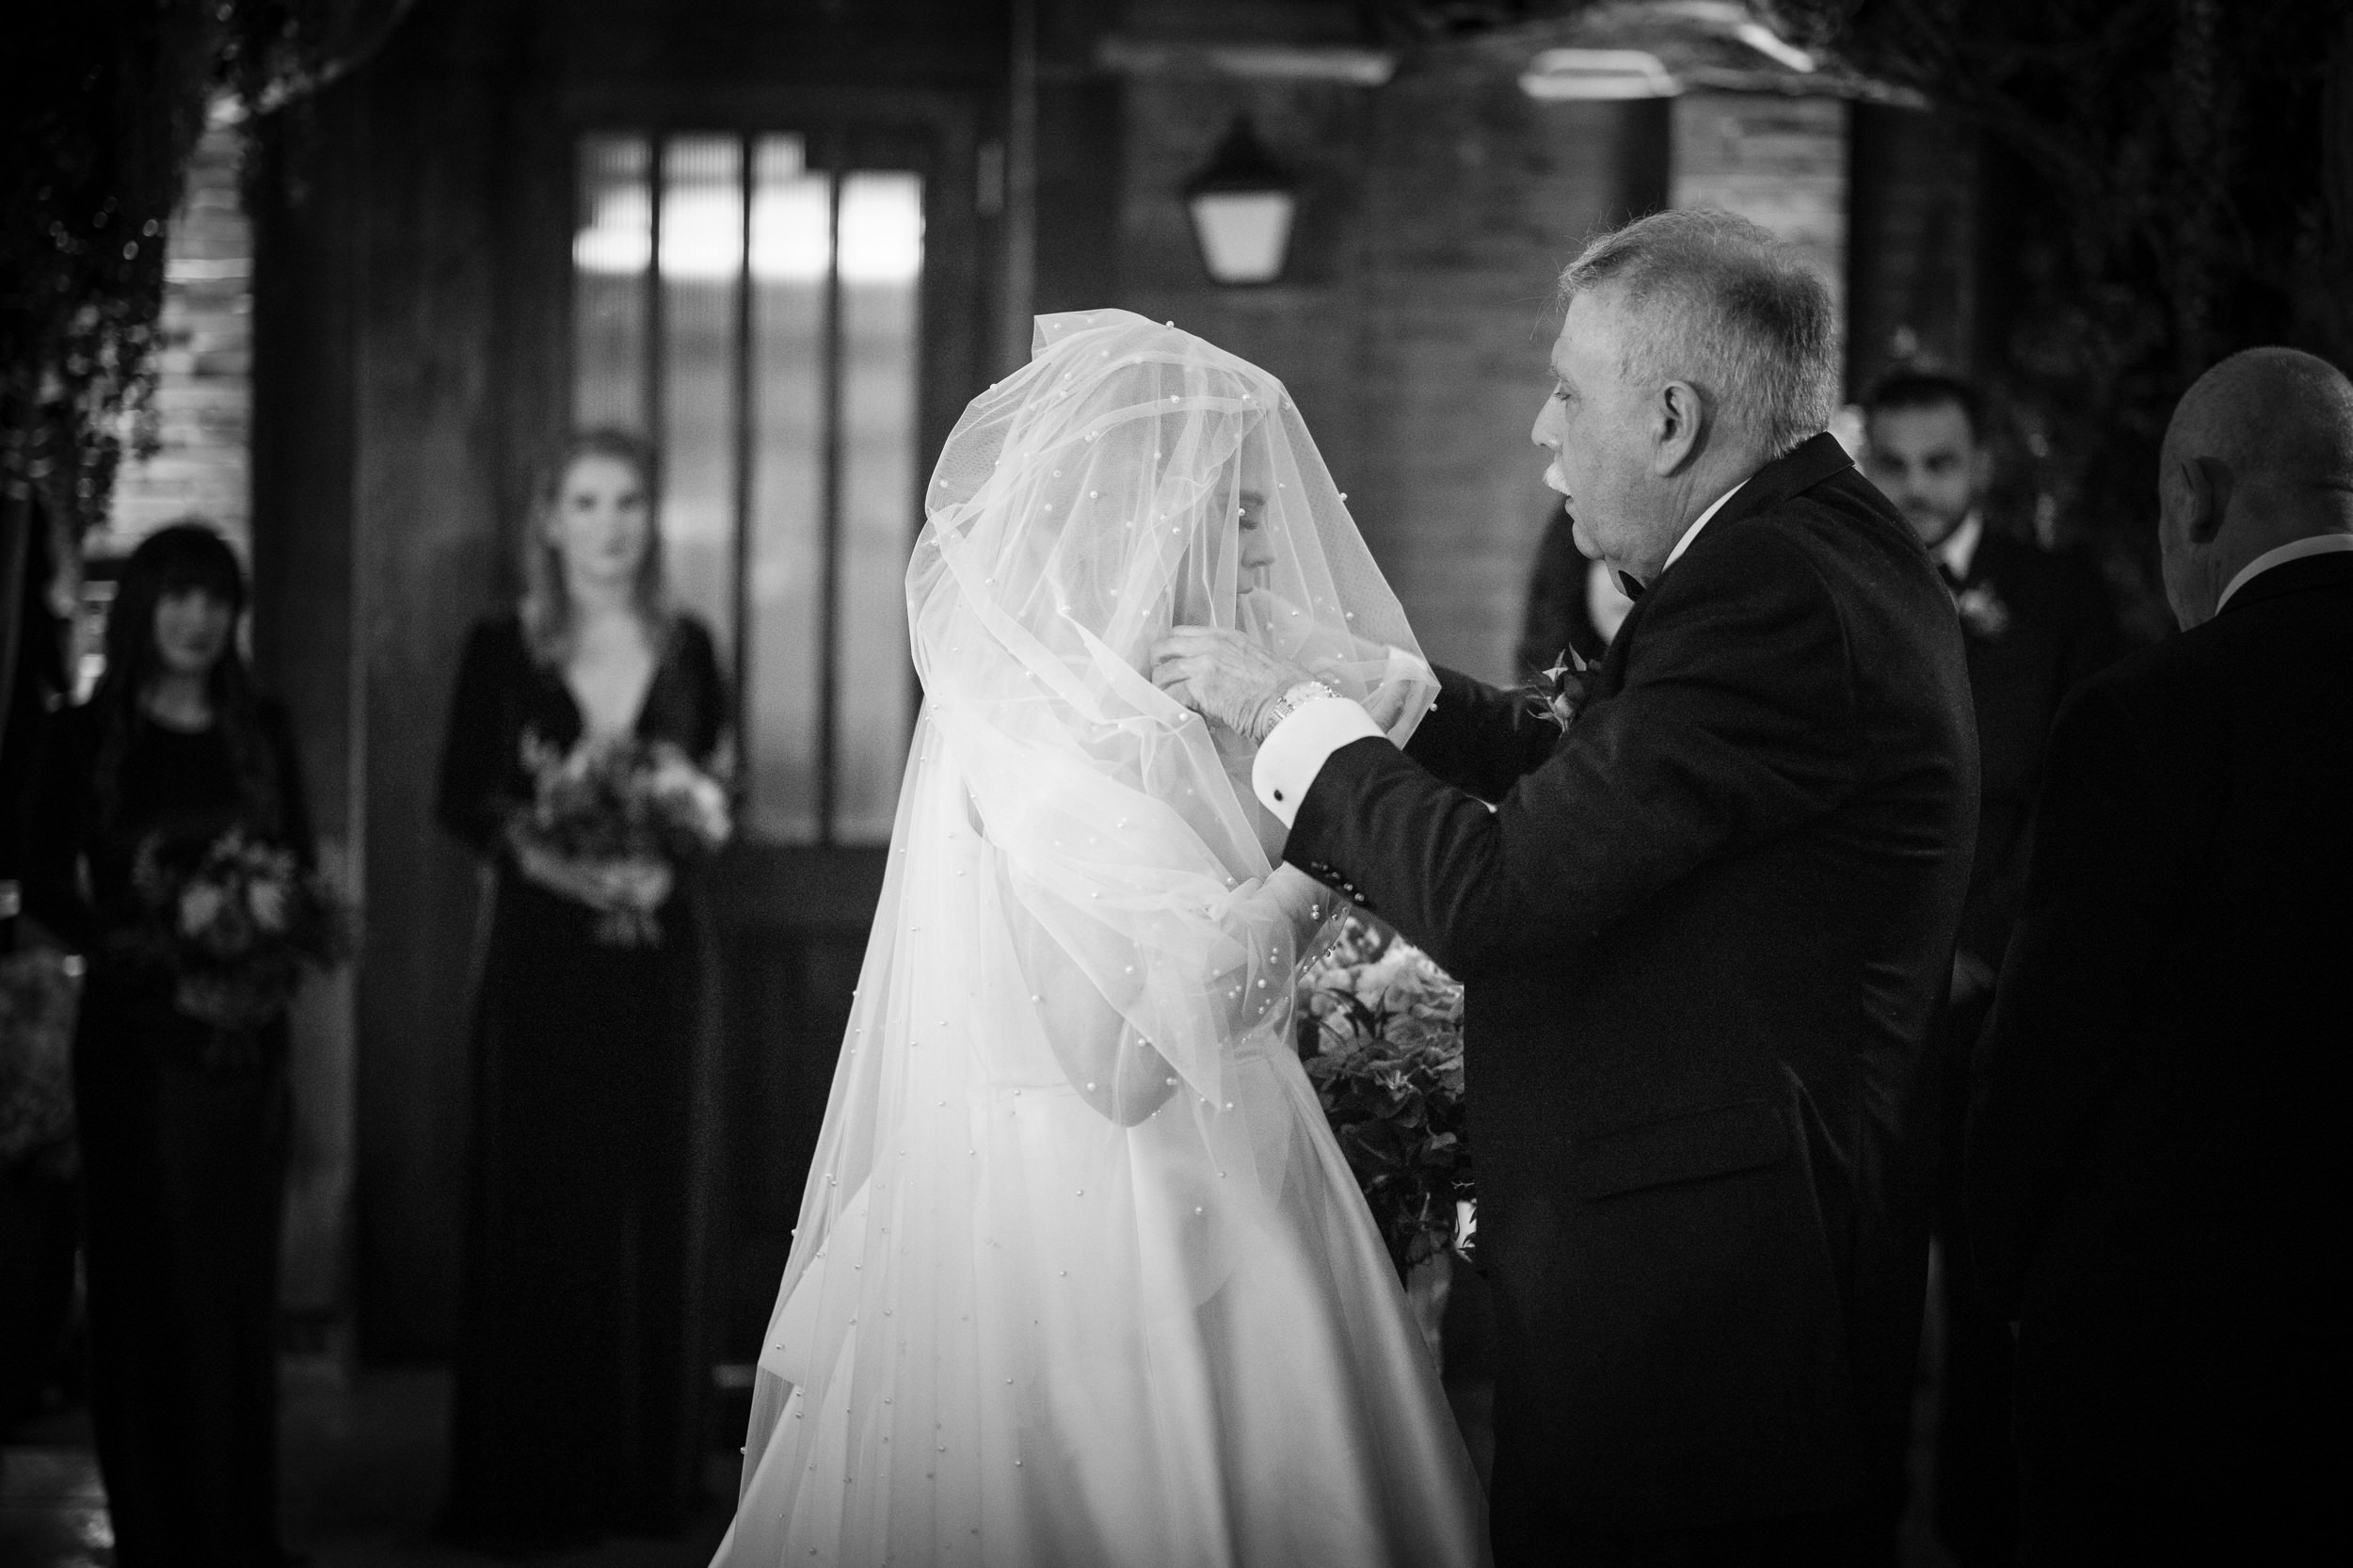 Bride and father at a Beekman Hotel wedding in NYC